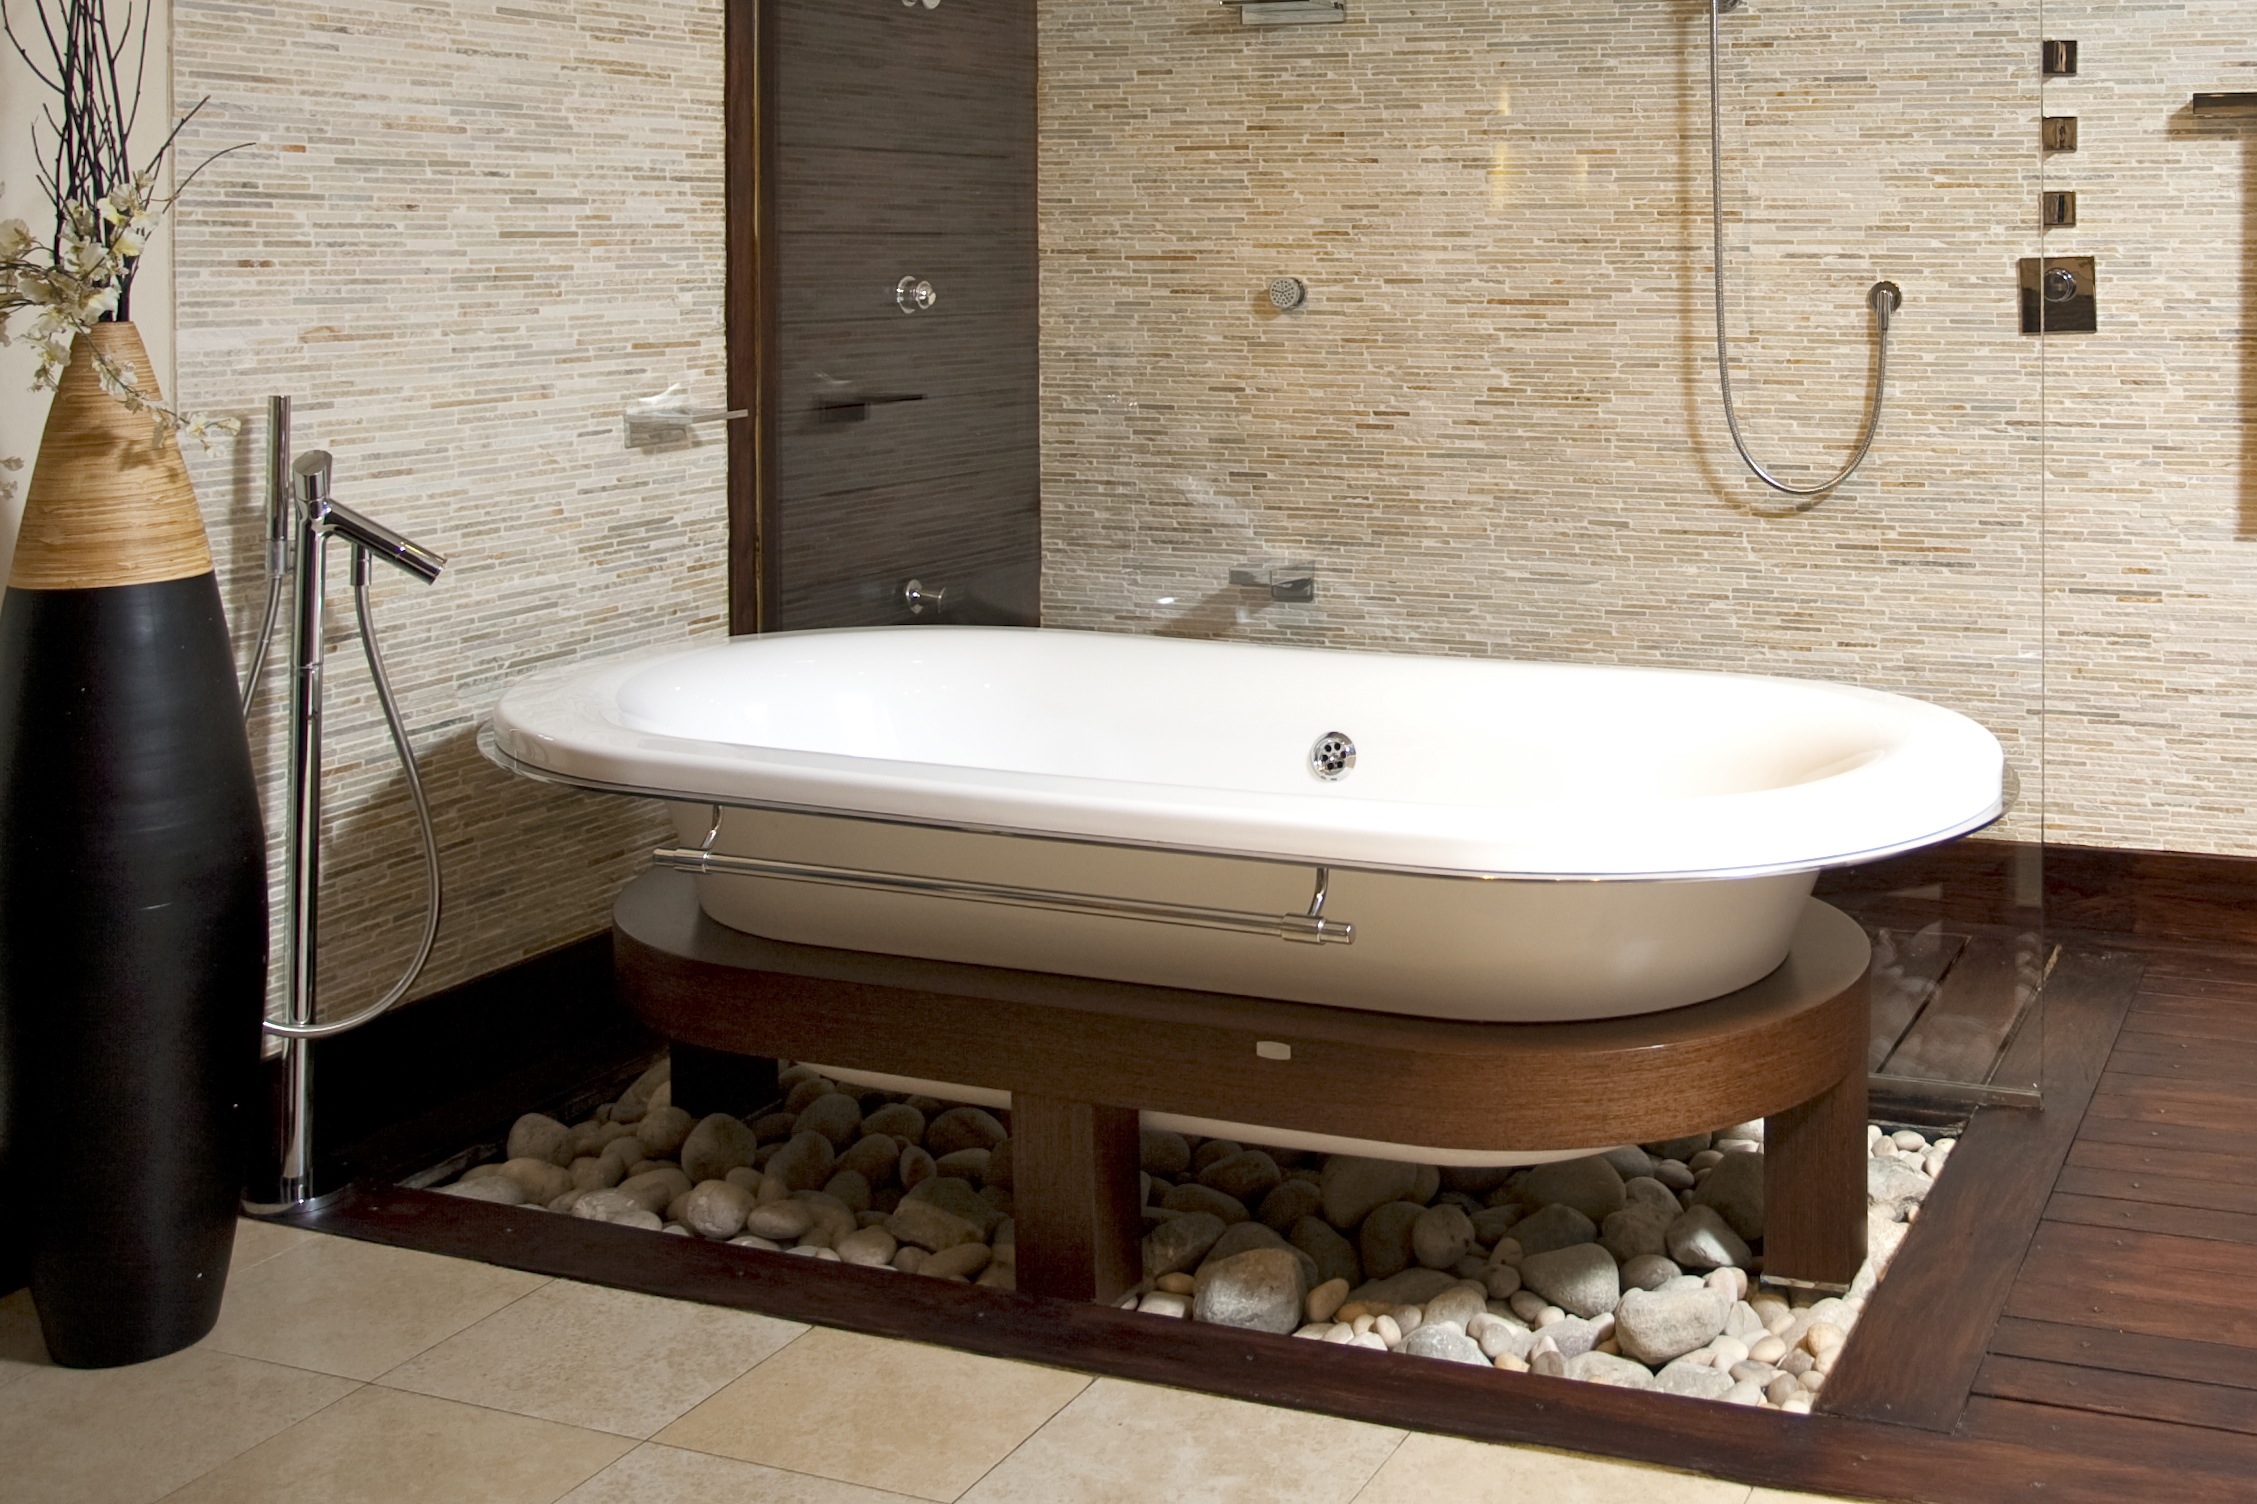 bathroom-stone-also-wooden-table-and-lovable-white-bathtub-and-glazing-design-ideas-unique-glazing-bathroom-fancy-toilet-bathroom-with-interesting-brown-bathroom-tiles-beauteous-unique-bathroom-tile